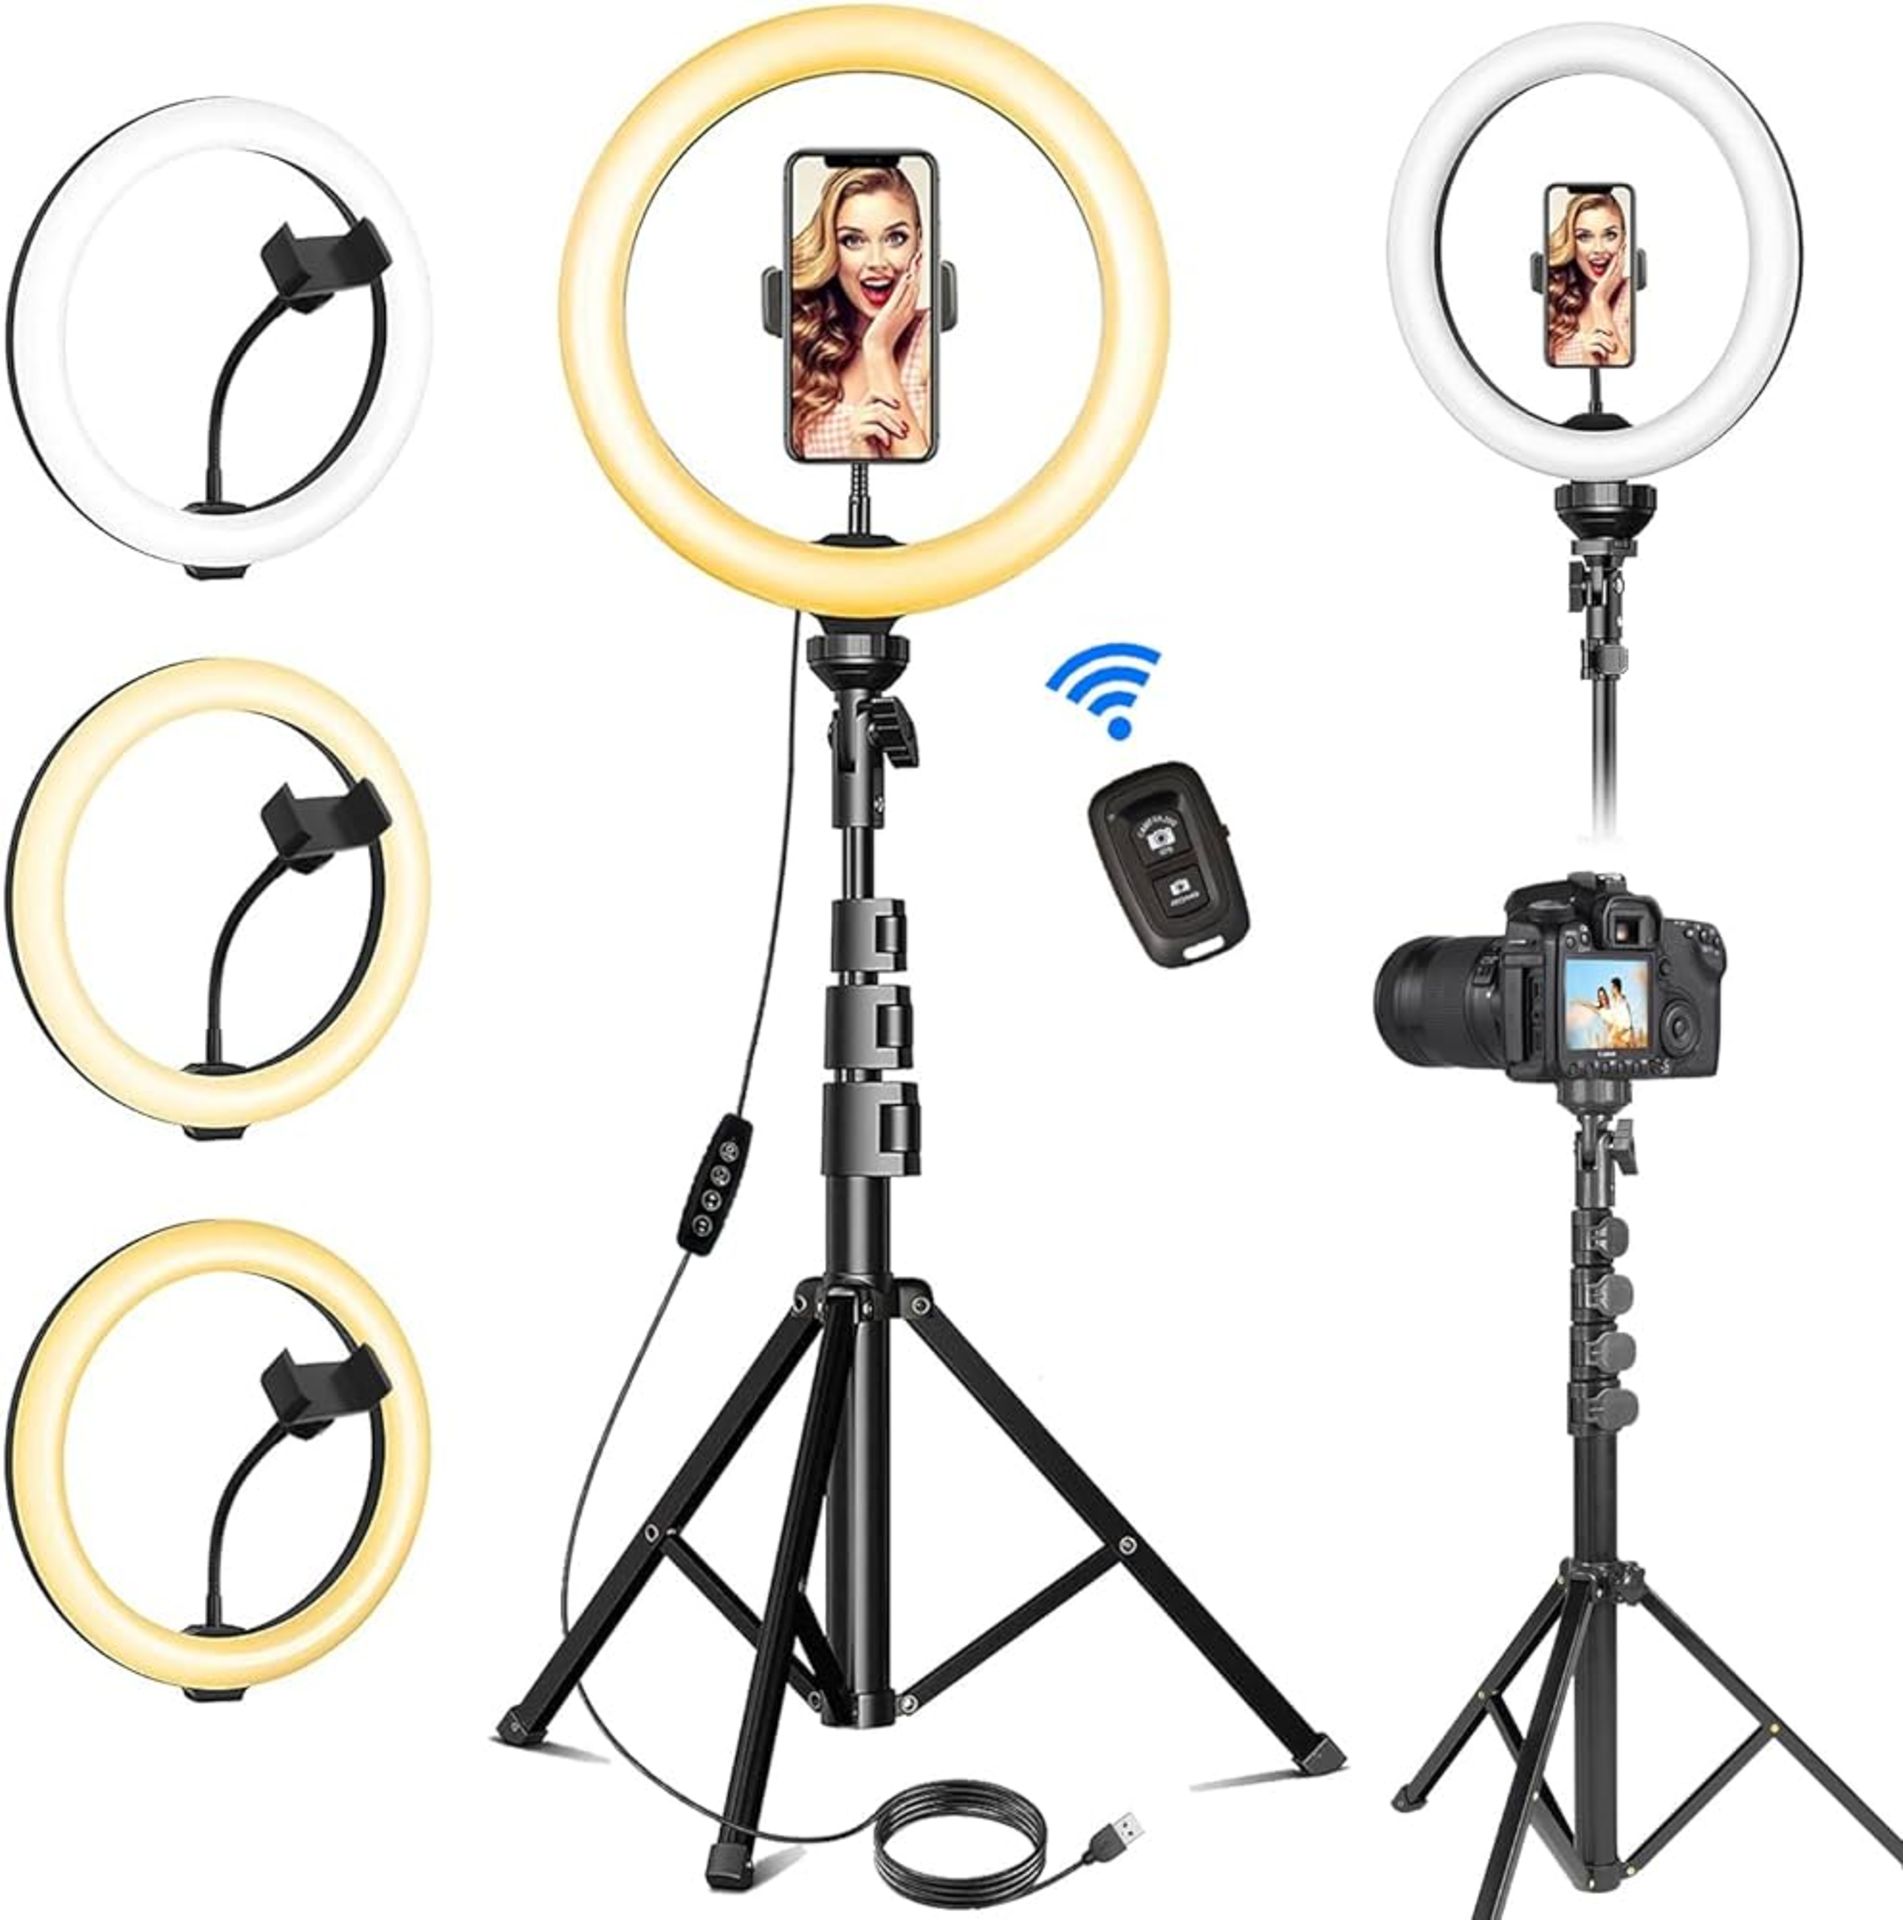 12 inch Ring Light (Delivery Band A)